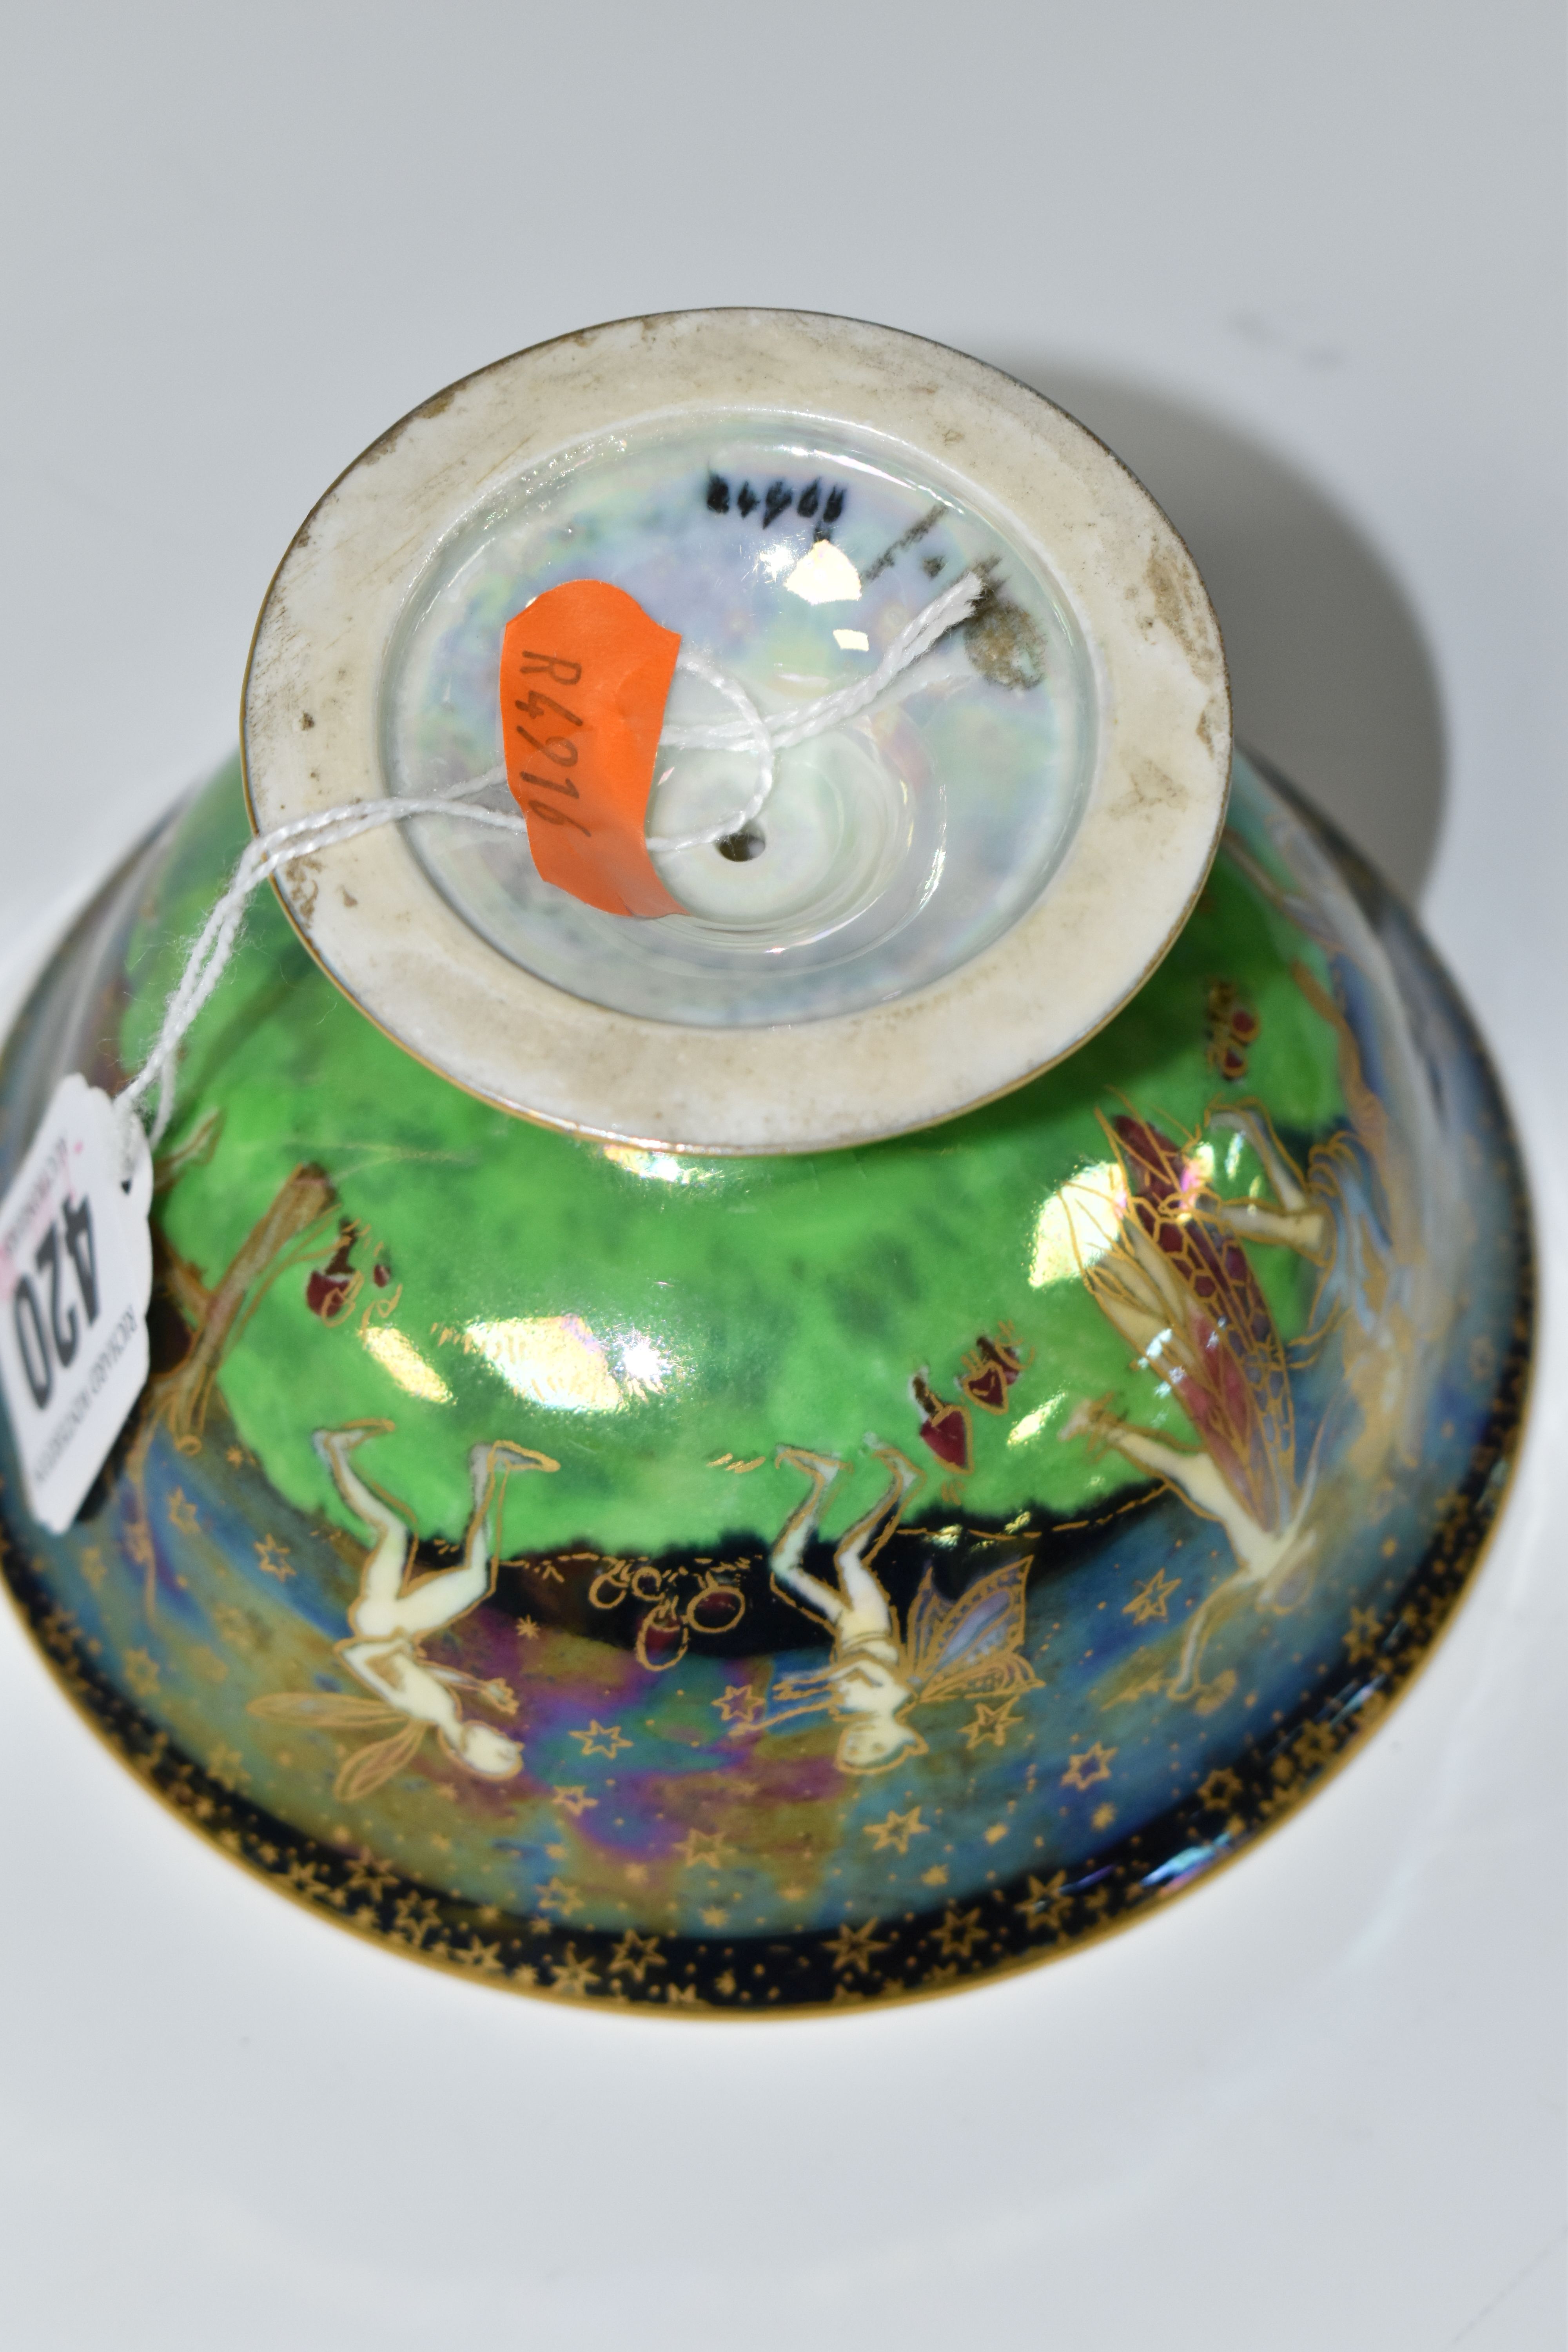 A WEDGWOOD FAIRYLAND LUSTRE FOOTED BOWL, decorated with a mother of pearl lustre with fairies in - Image 9 of 9